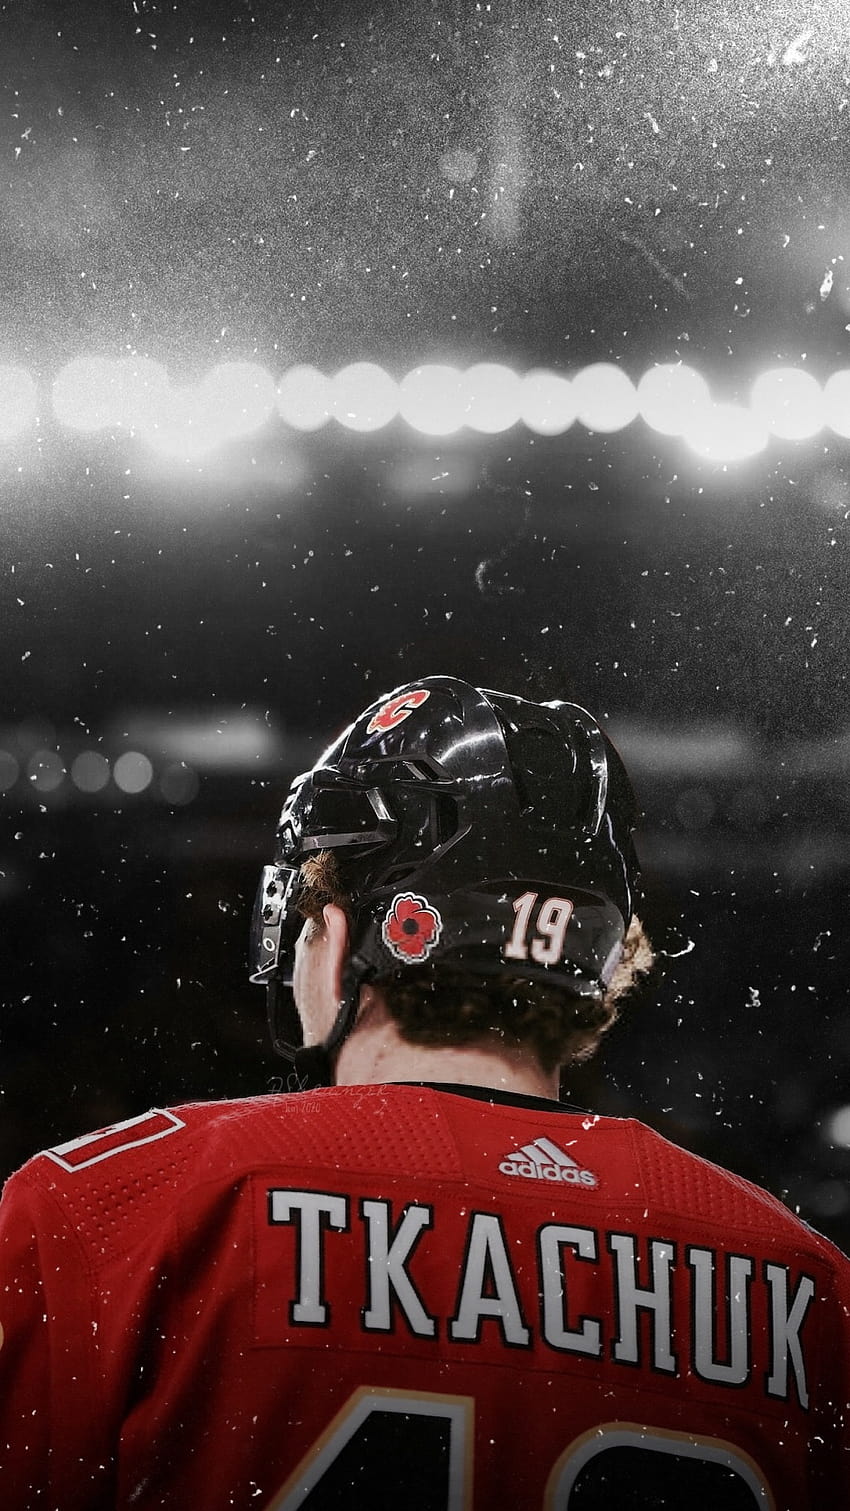 Wallpaper Ice Hockey Players in Dynamic Action | Fruugo DK